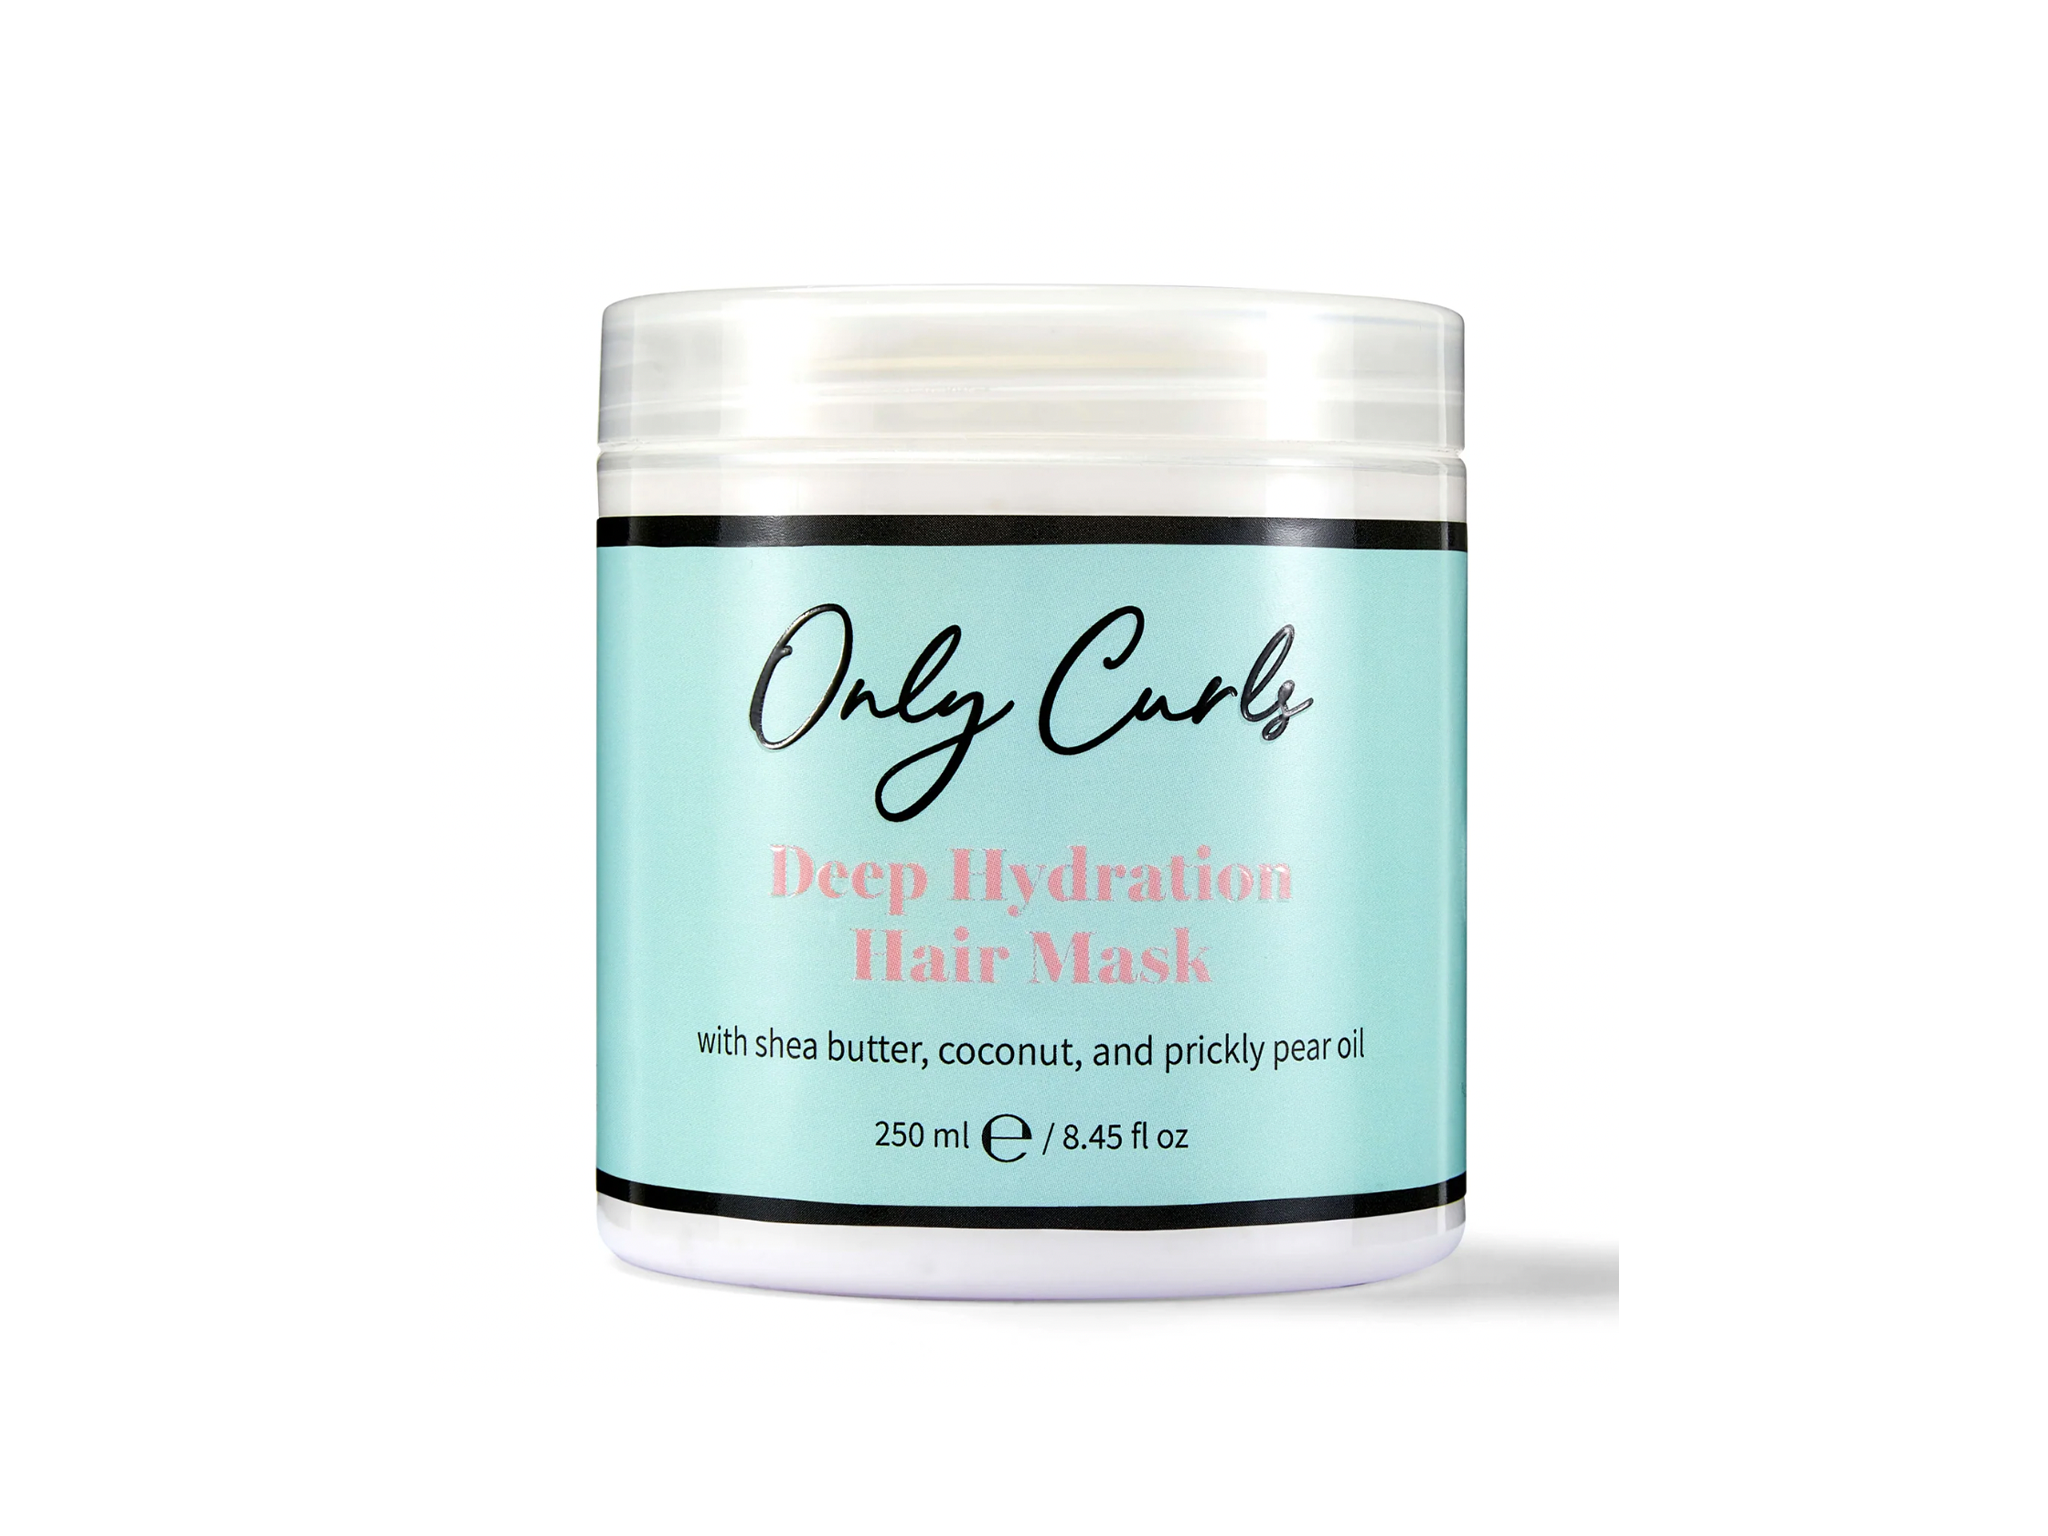 Only Curls deep hydration hair mask